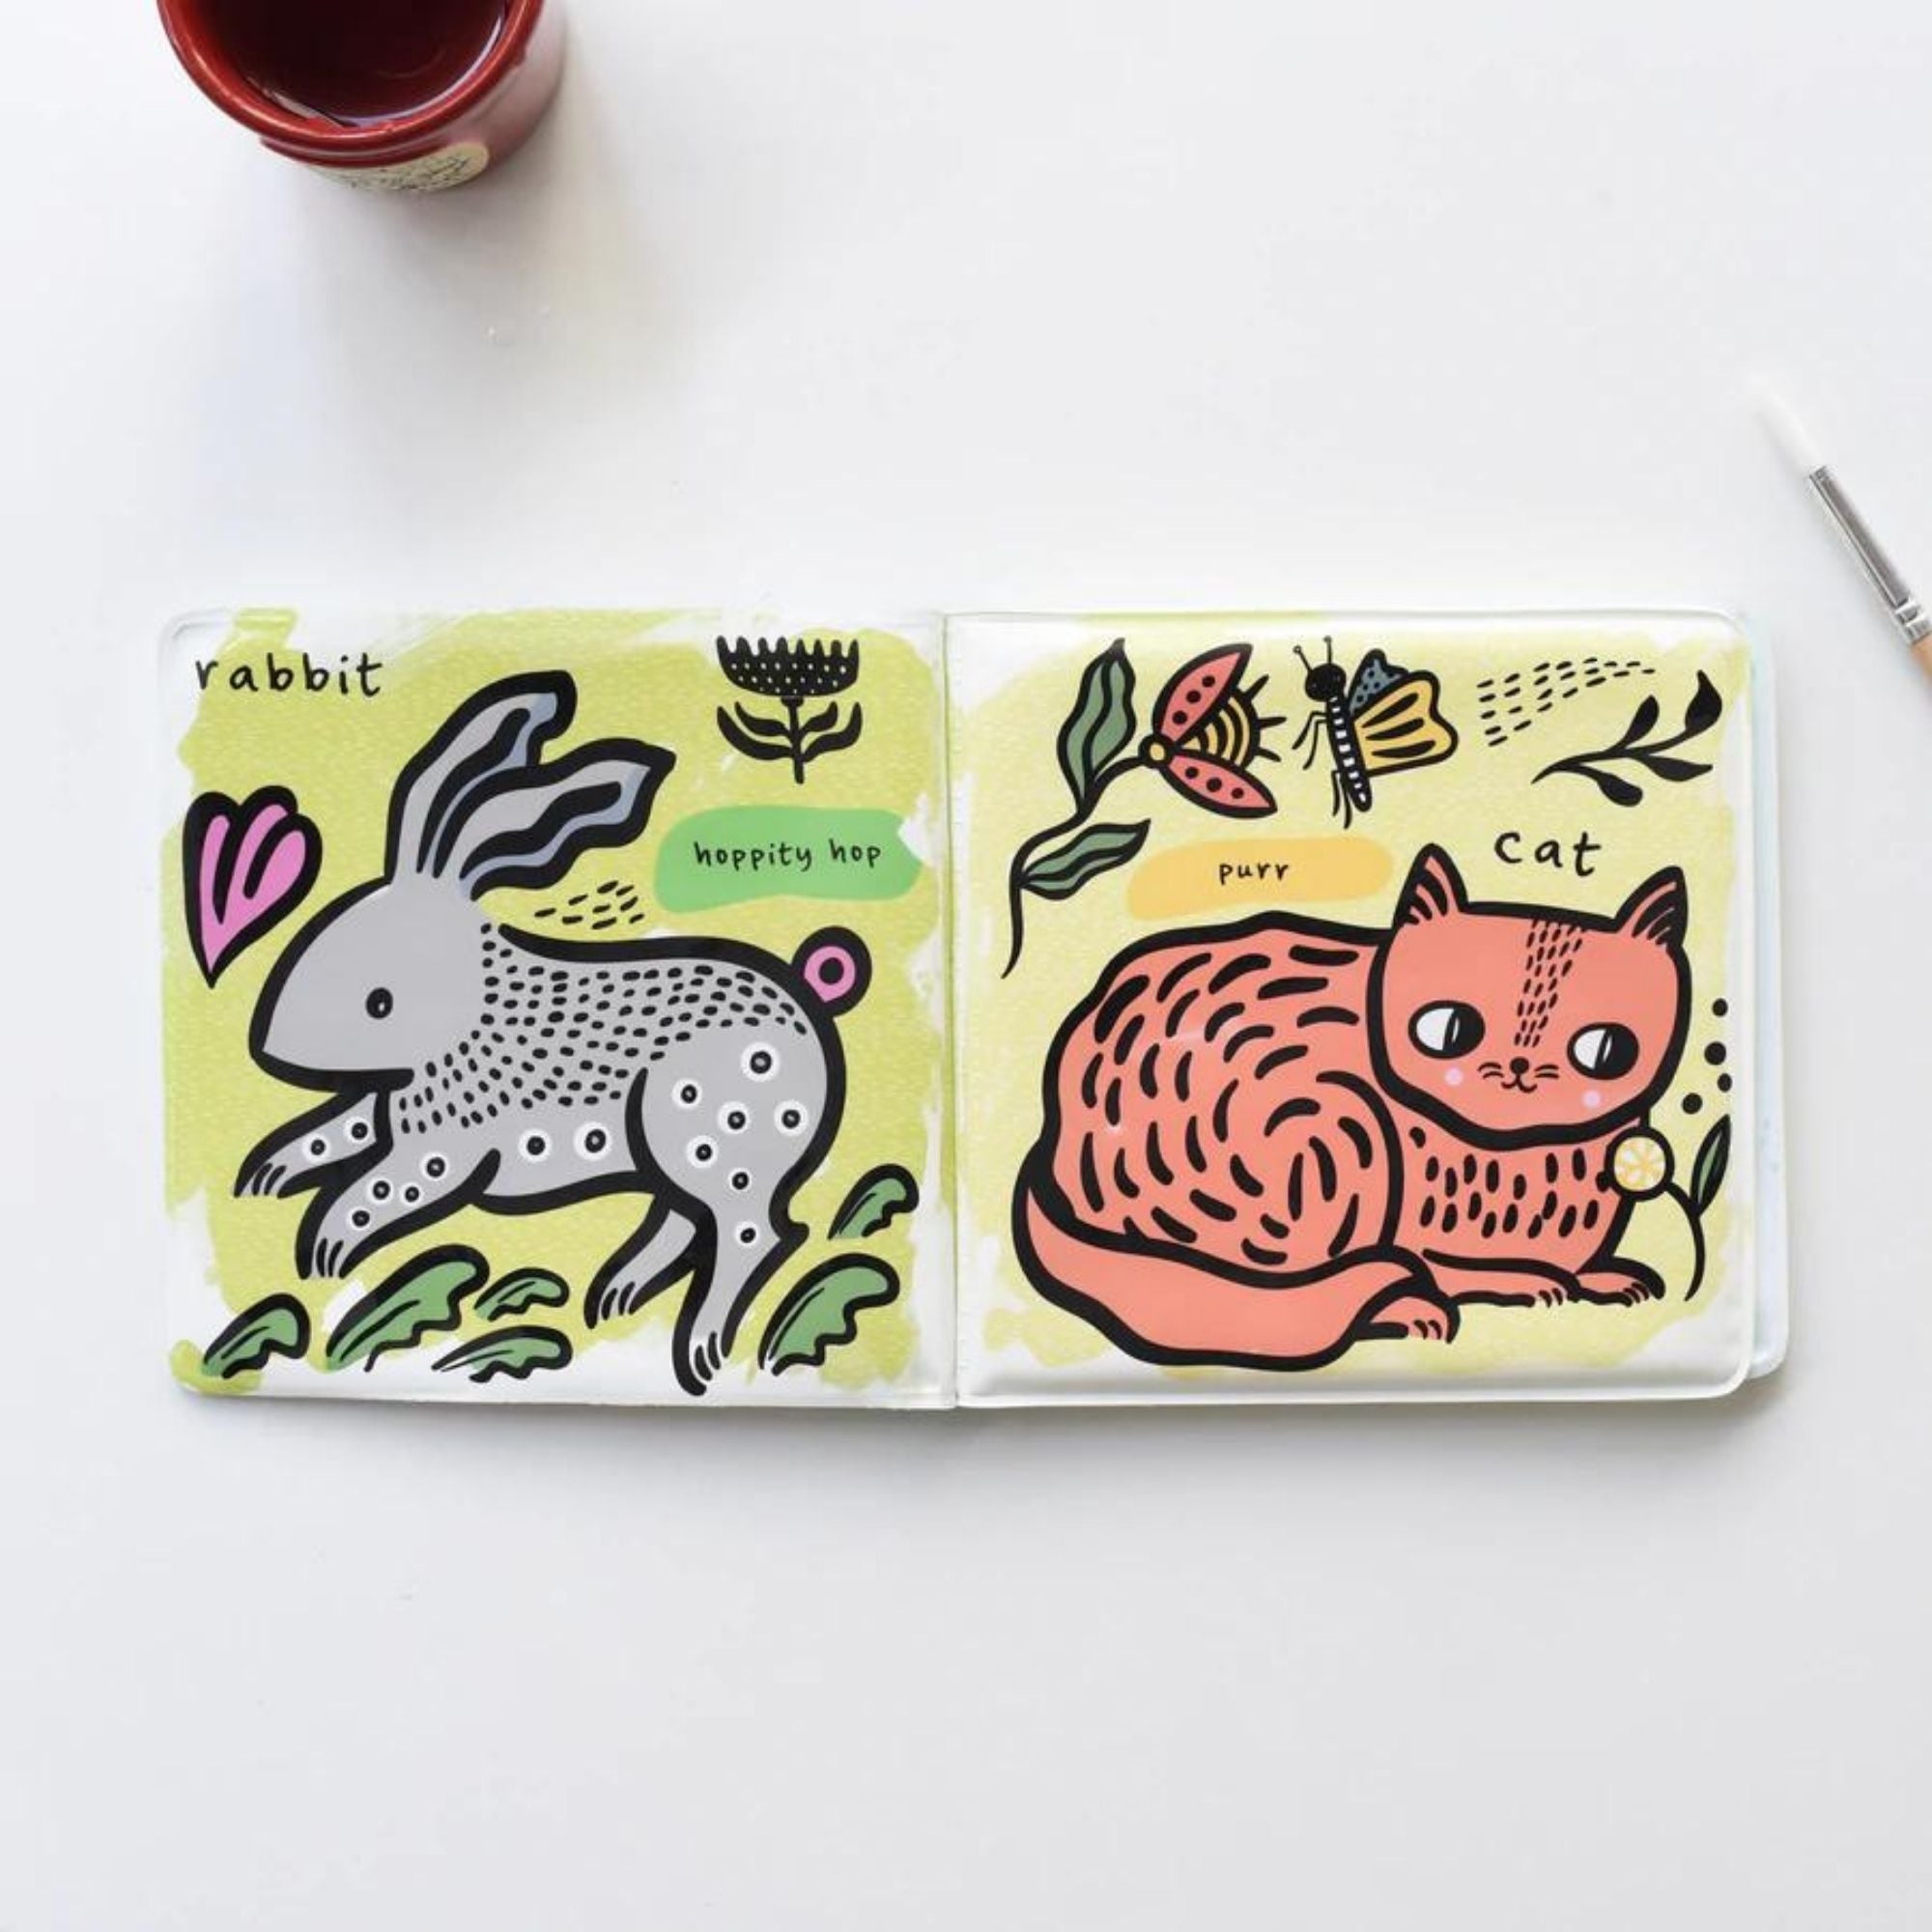 Wee Gallery Bath Book Color Me:Who loves pets?